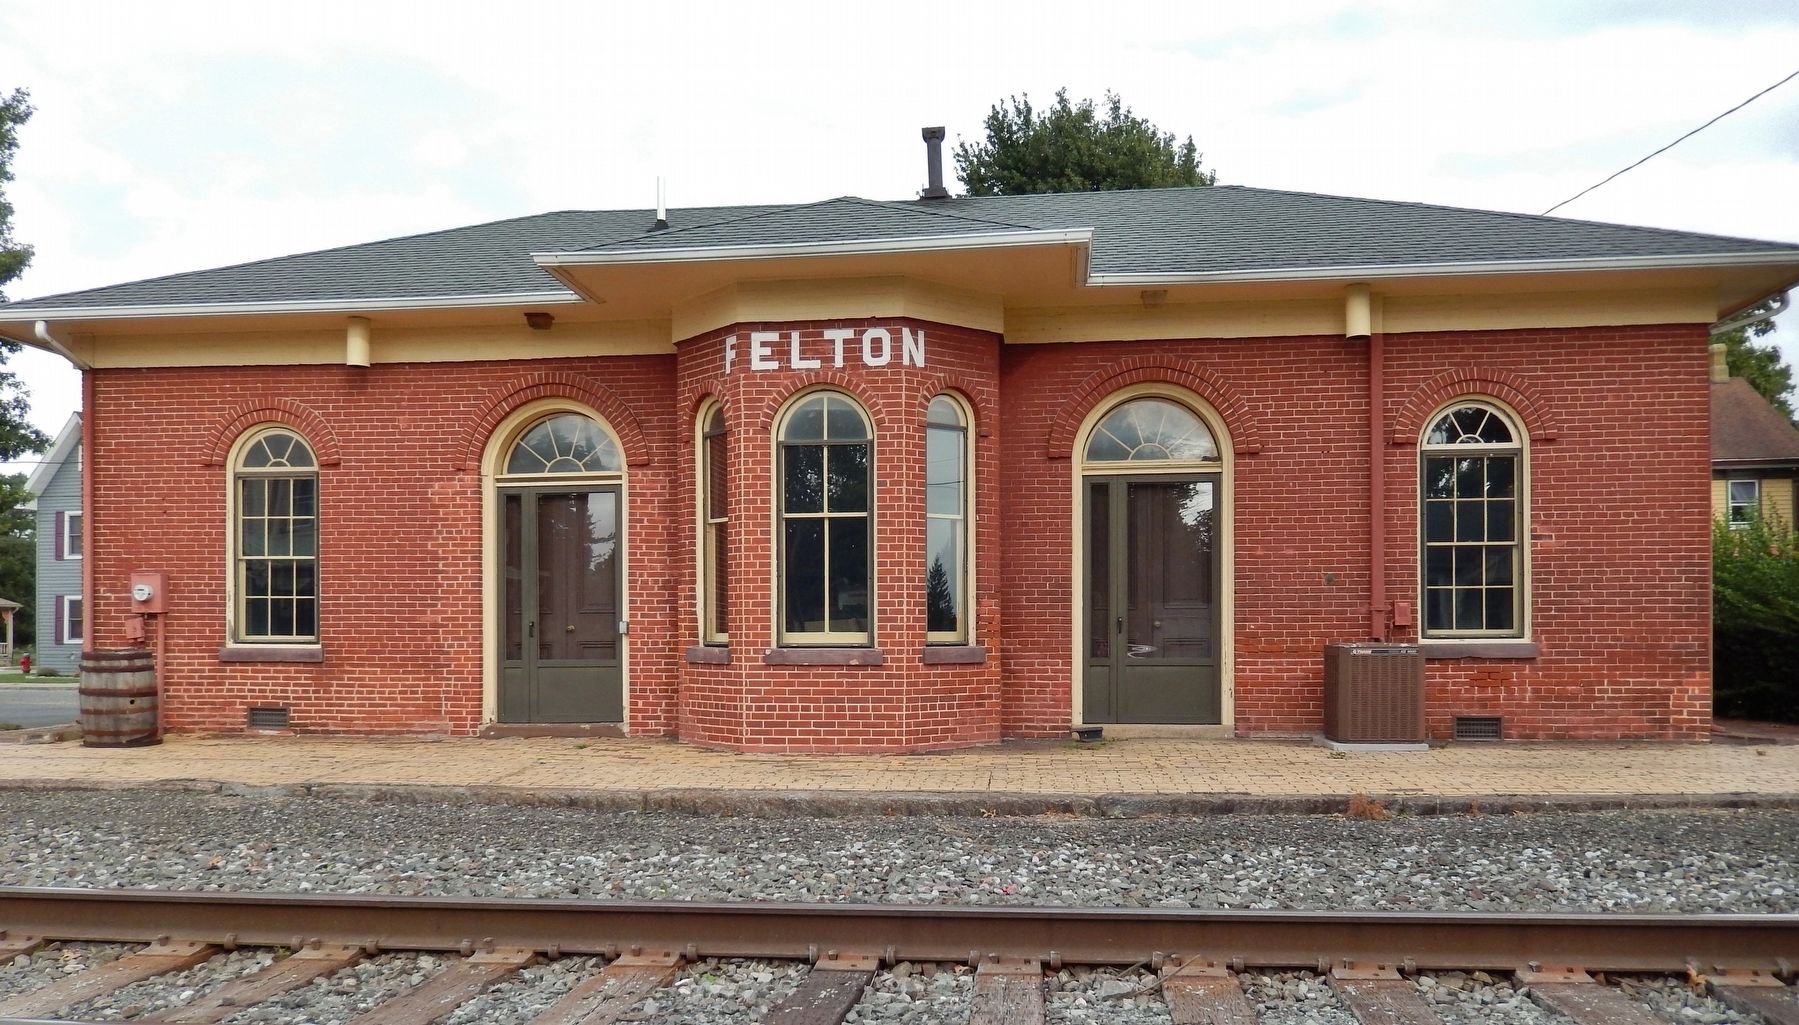 Felton Railroad Station<br>(<i>west side view from railroad tracks</i>) image. Click for full size.